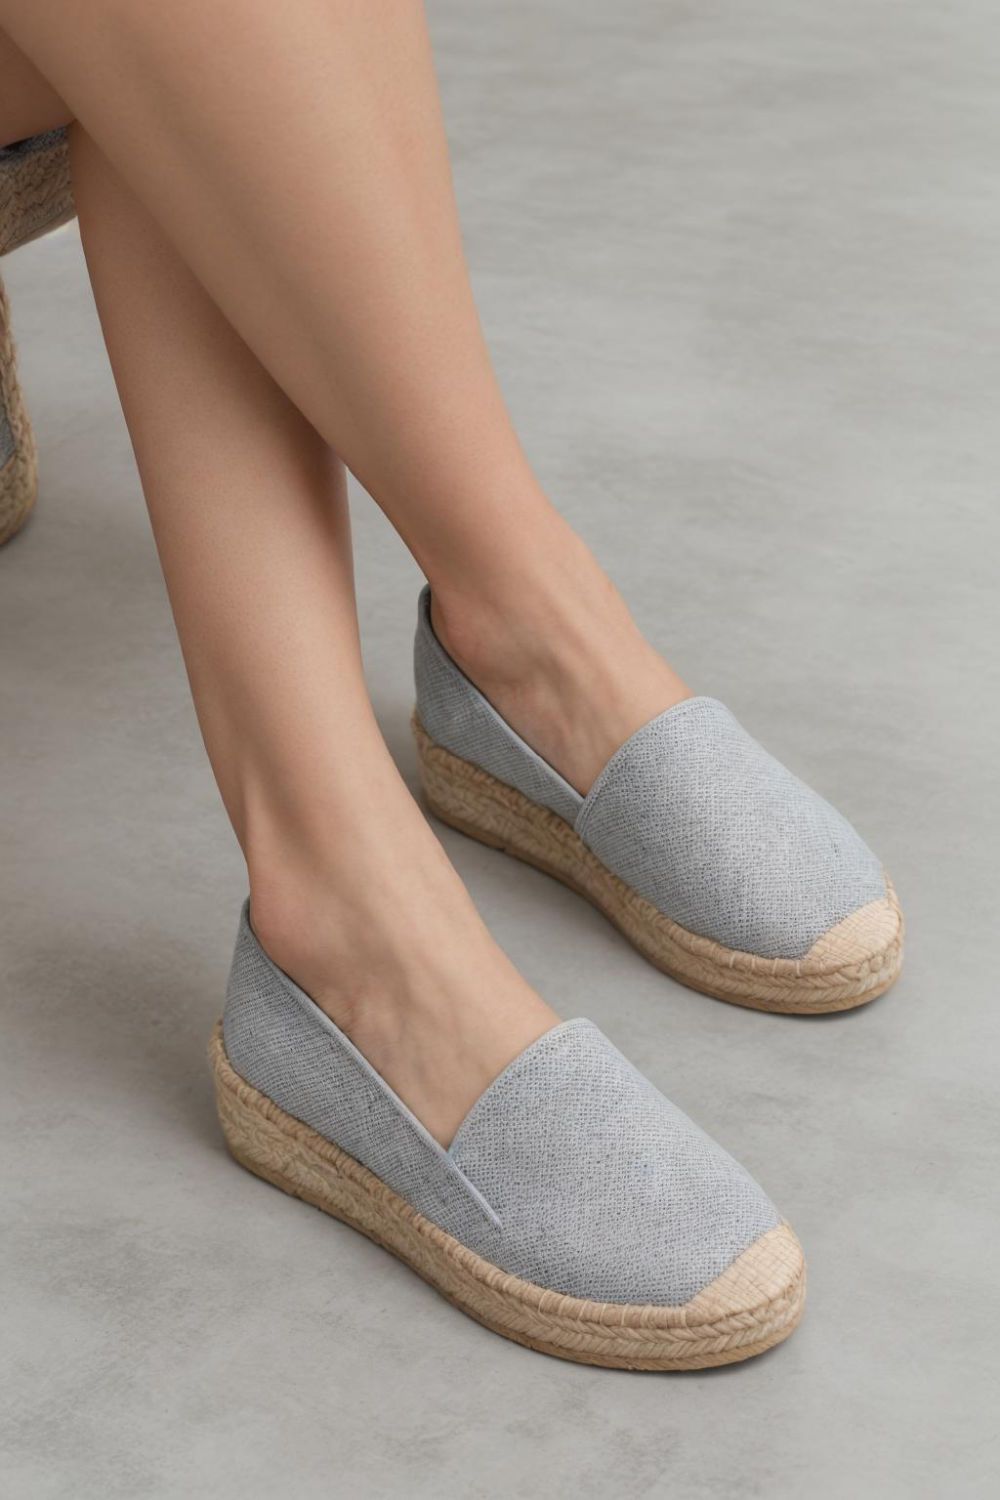 espadrilles for sring and summer shoes